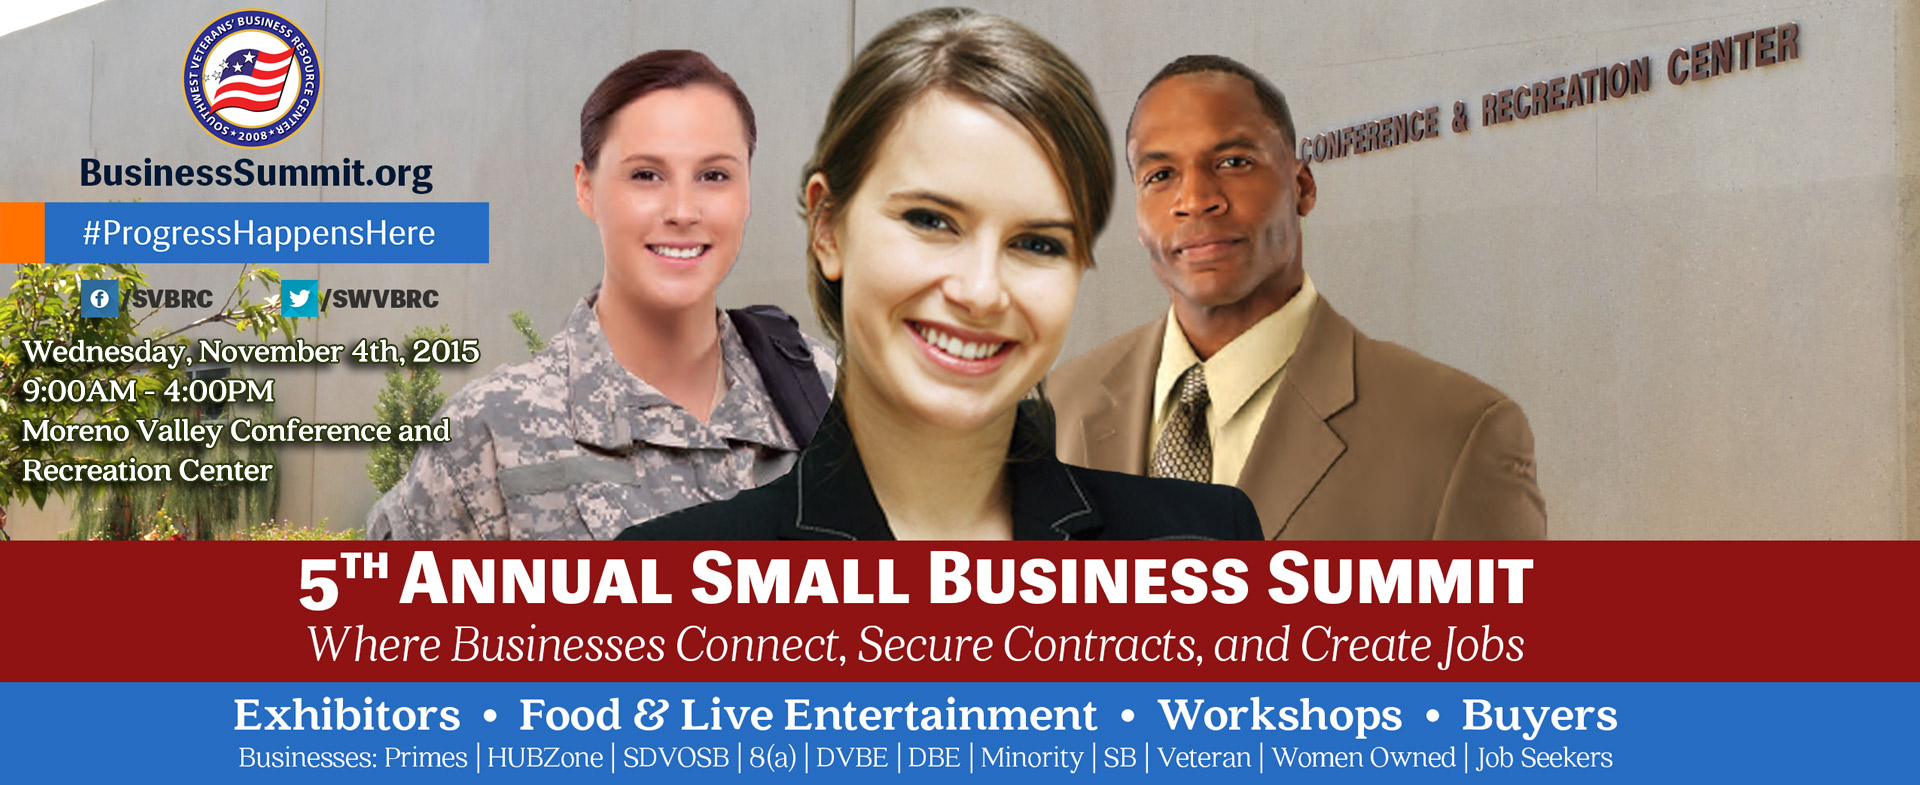 5th Annual Business Summit